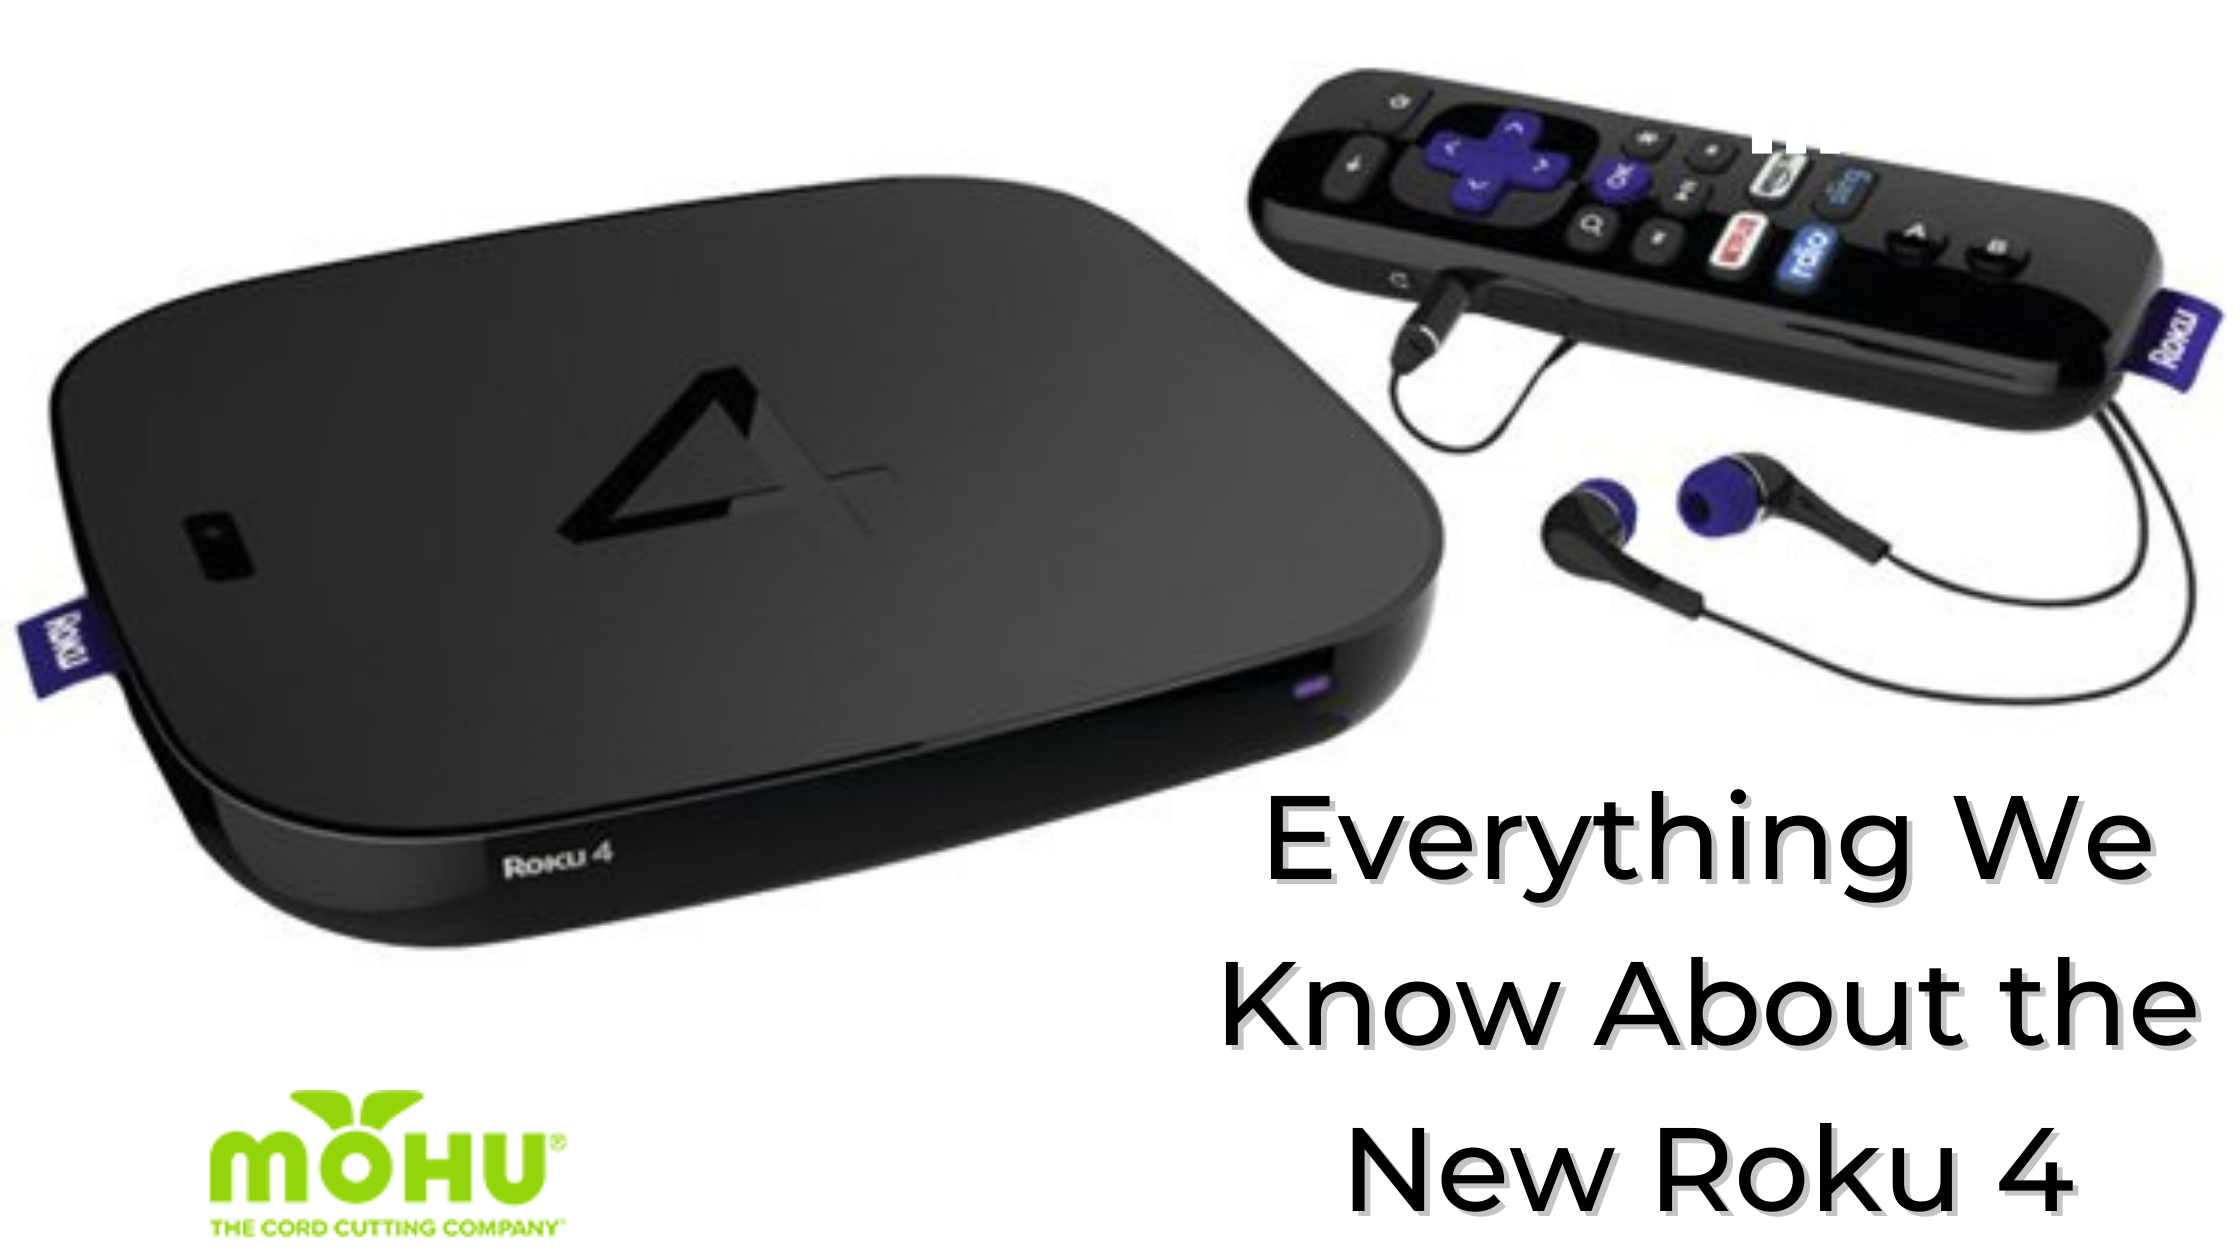 Everything We Know About the New Roku 4 Mohu